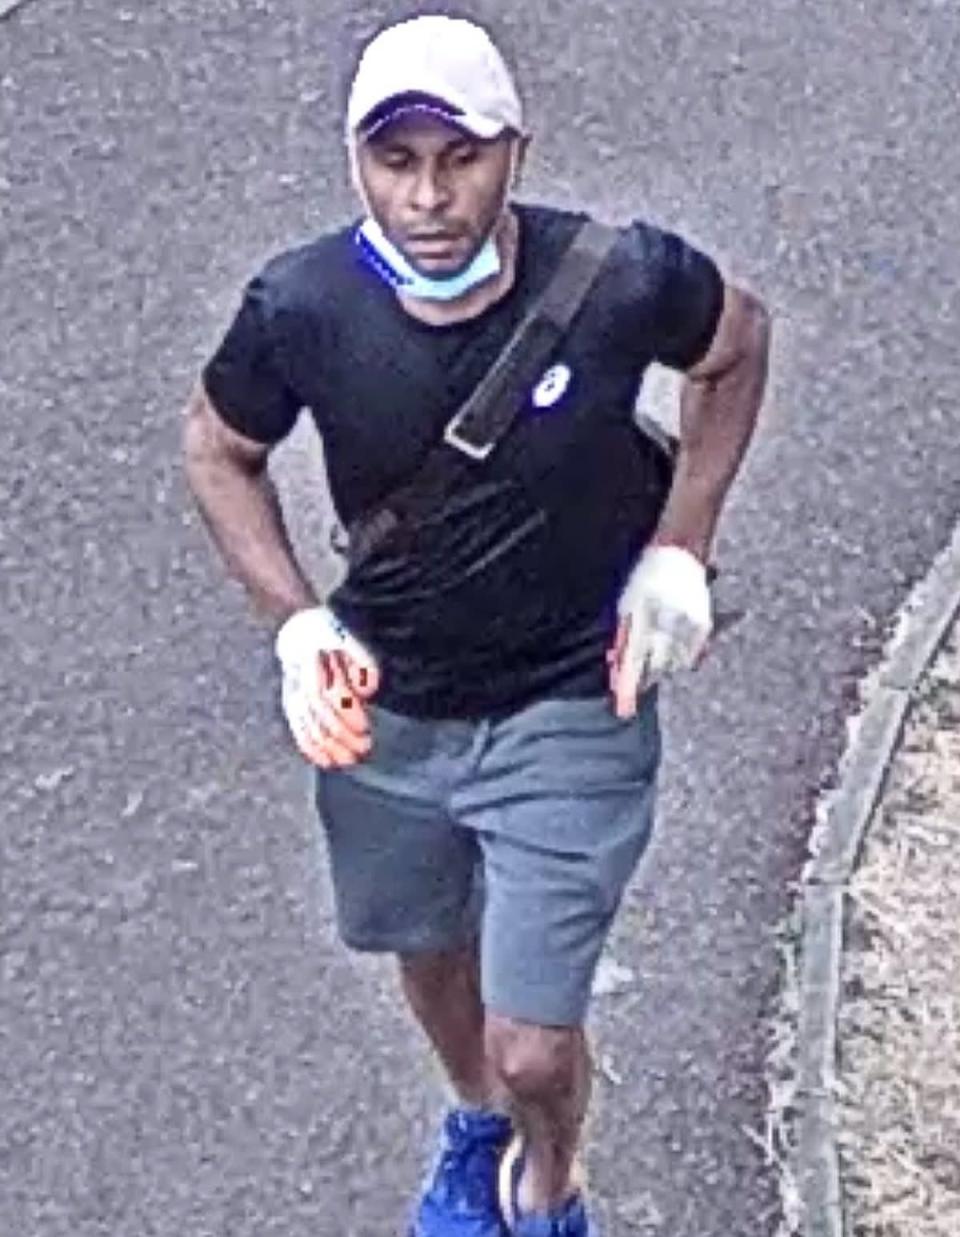 A man who was seen running from the scene of the stabbing of Thomas O’Halloran is being sought by police (Metropolitan Police/PA) (PA Wire)